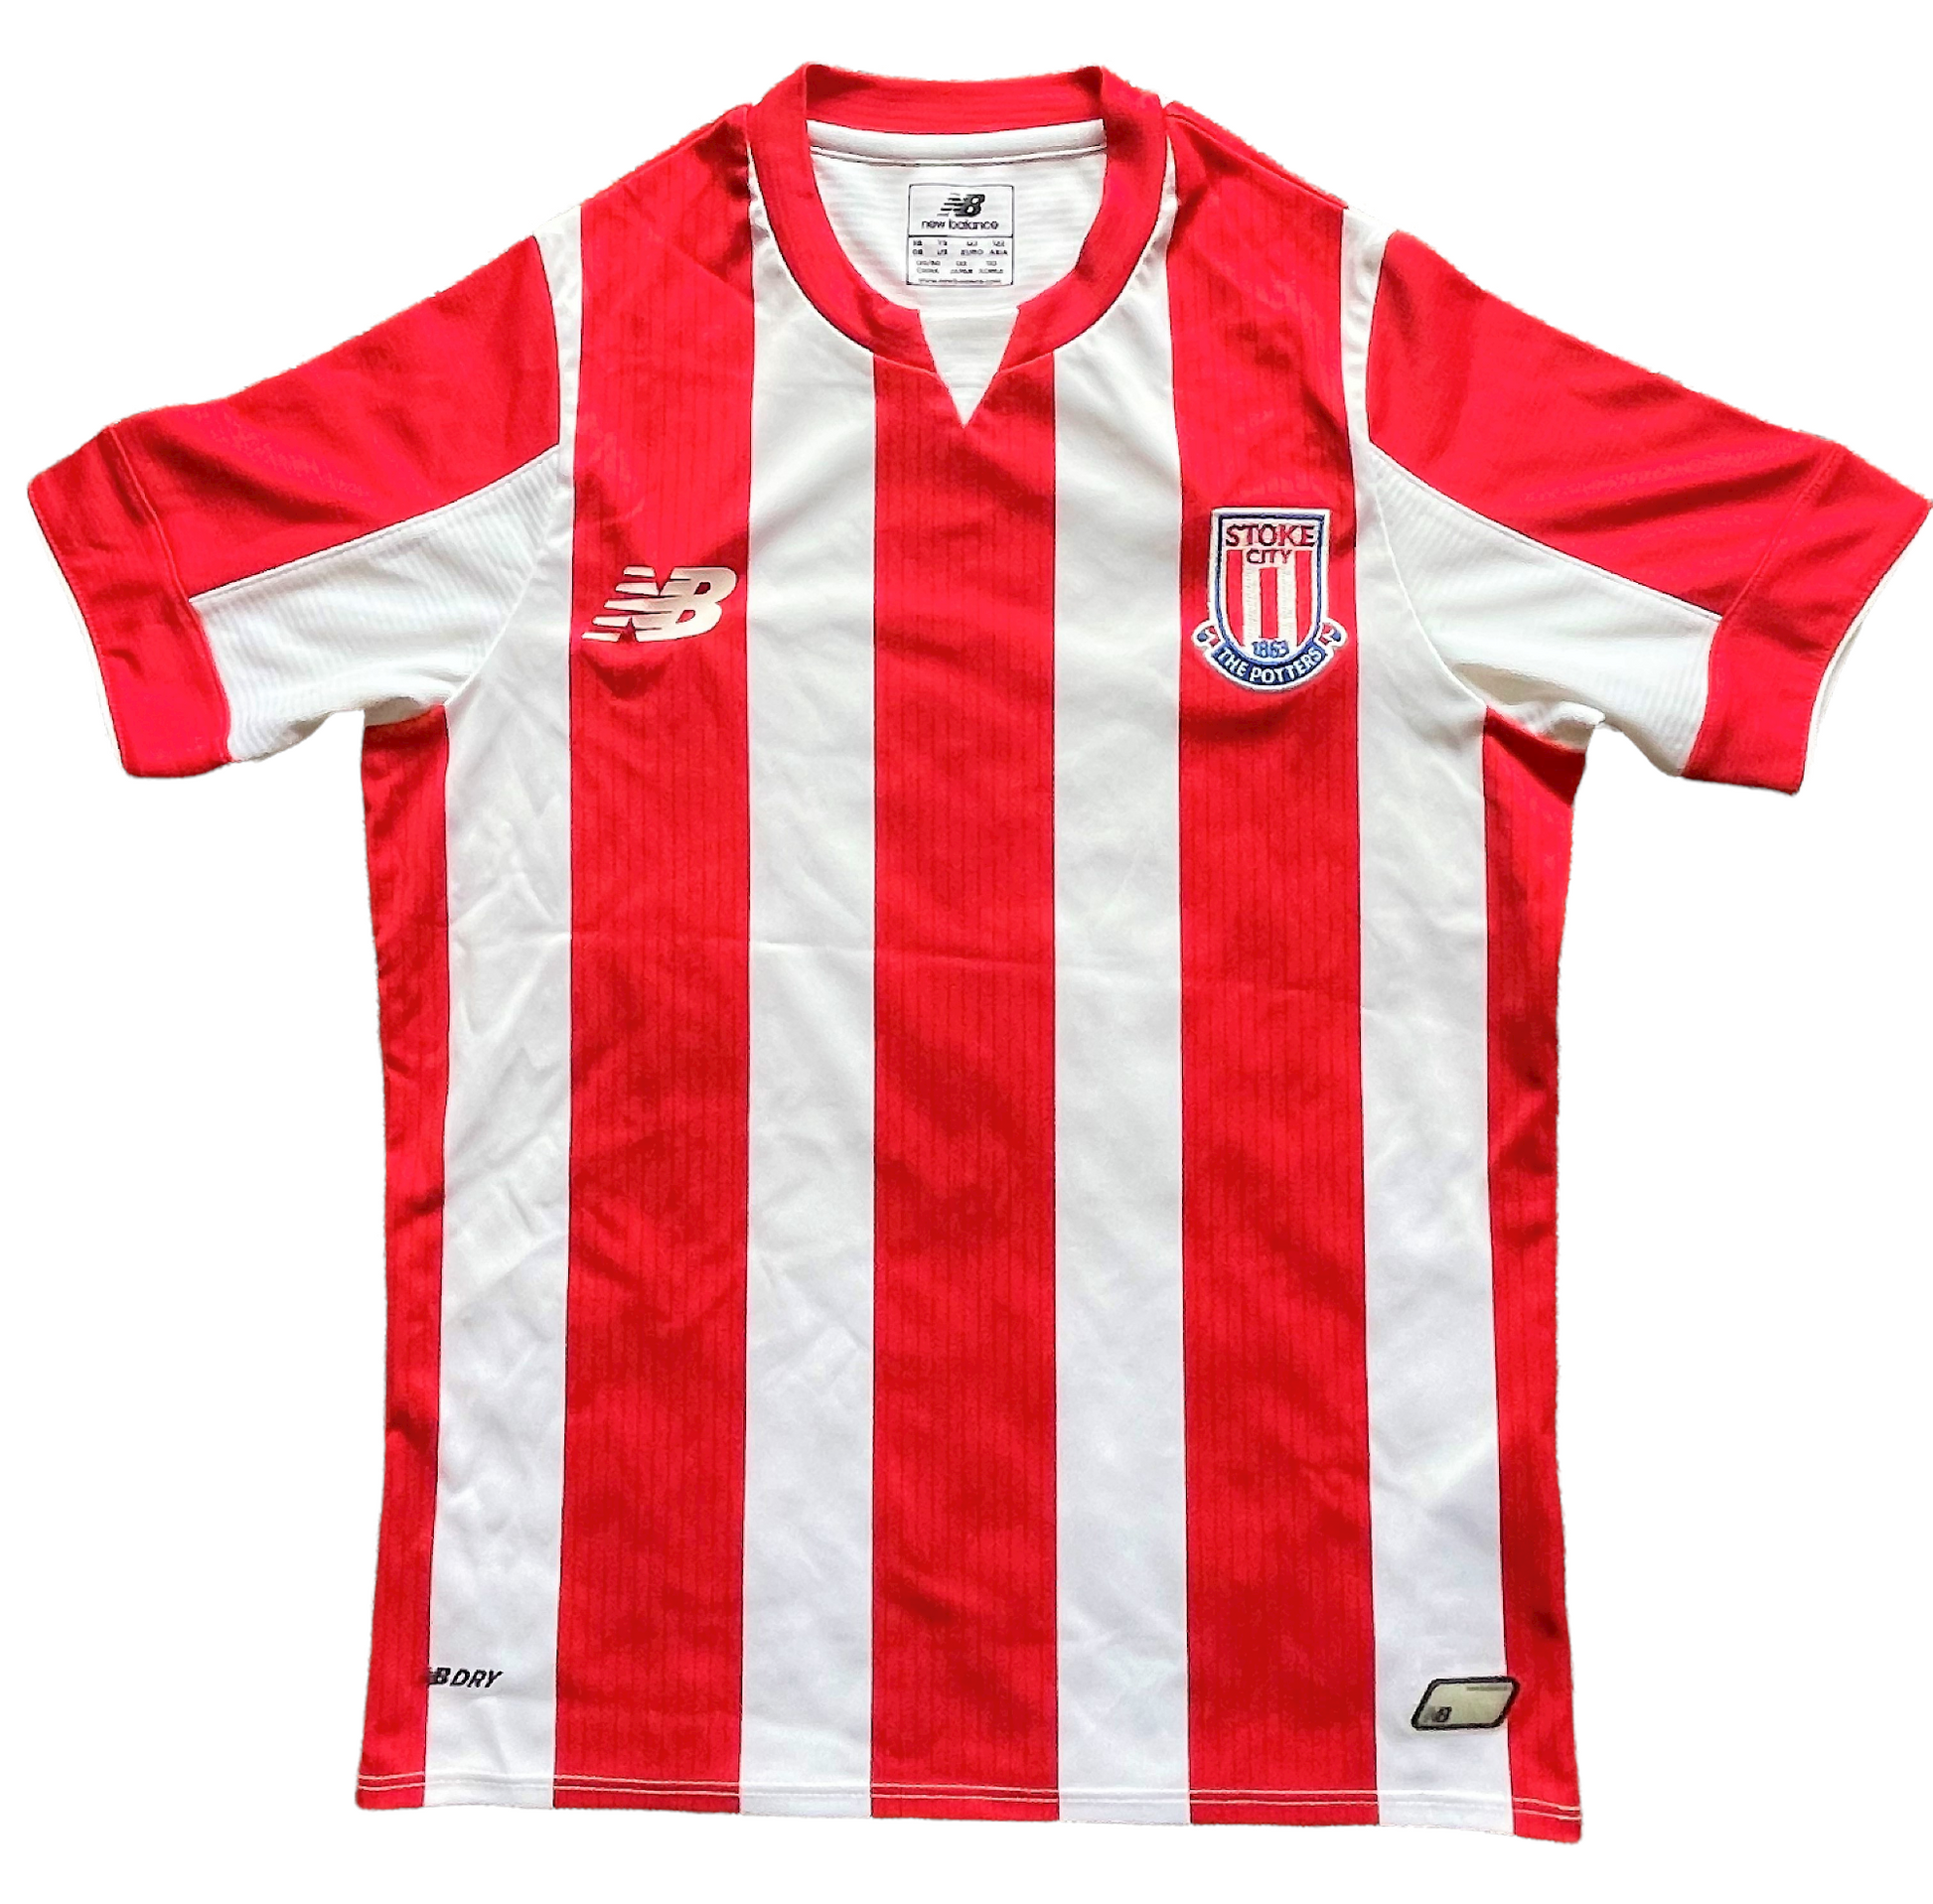 2015-16 Stoke City Home Shirt (excellent) Small Boys